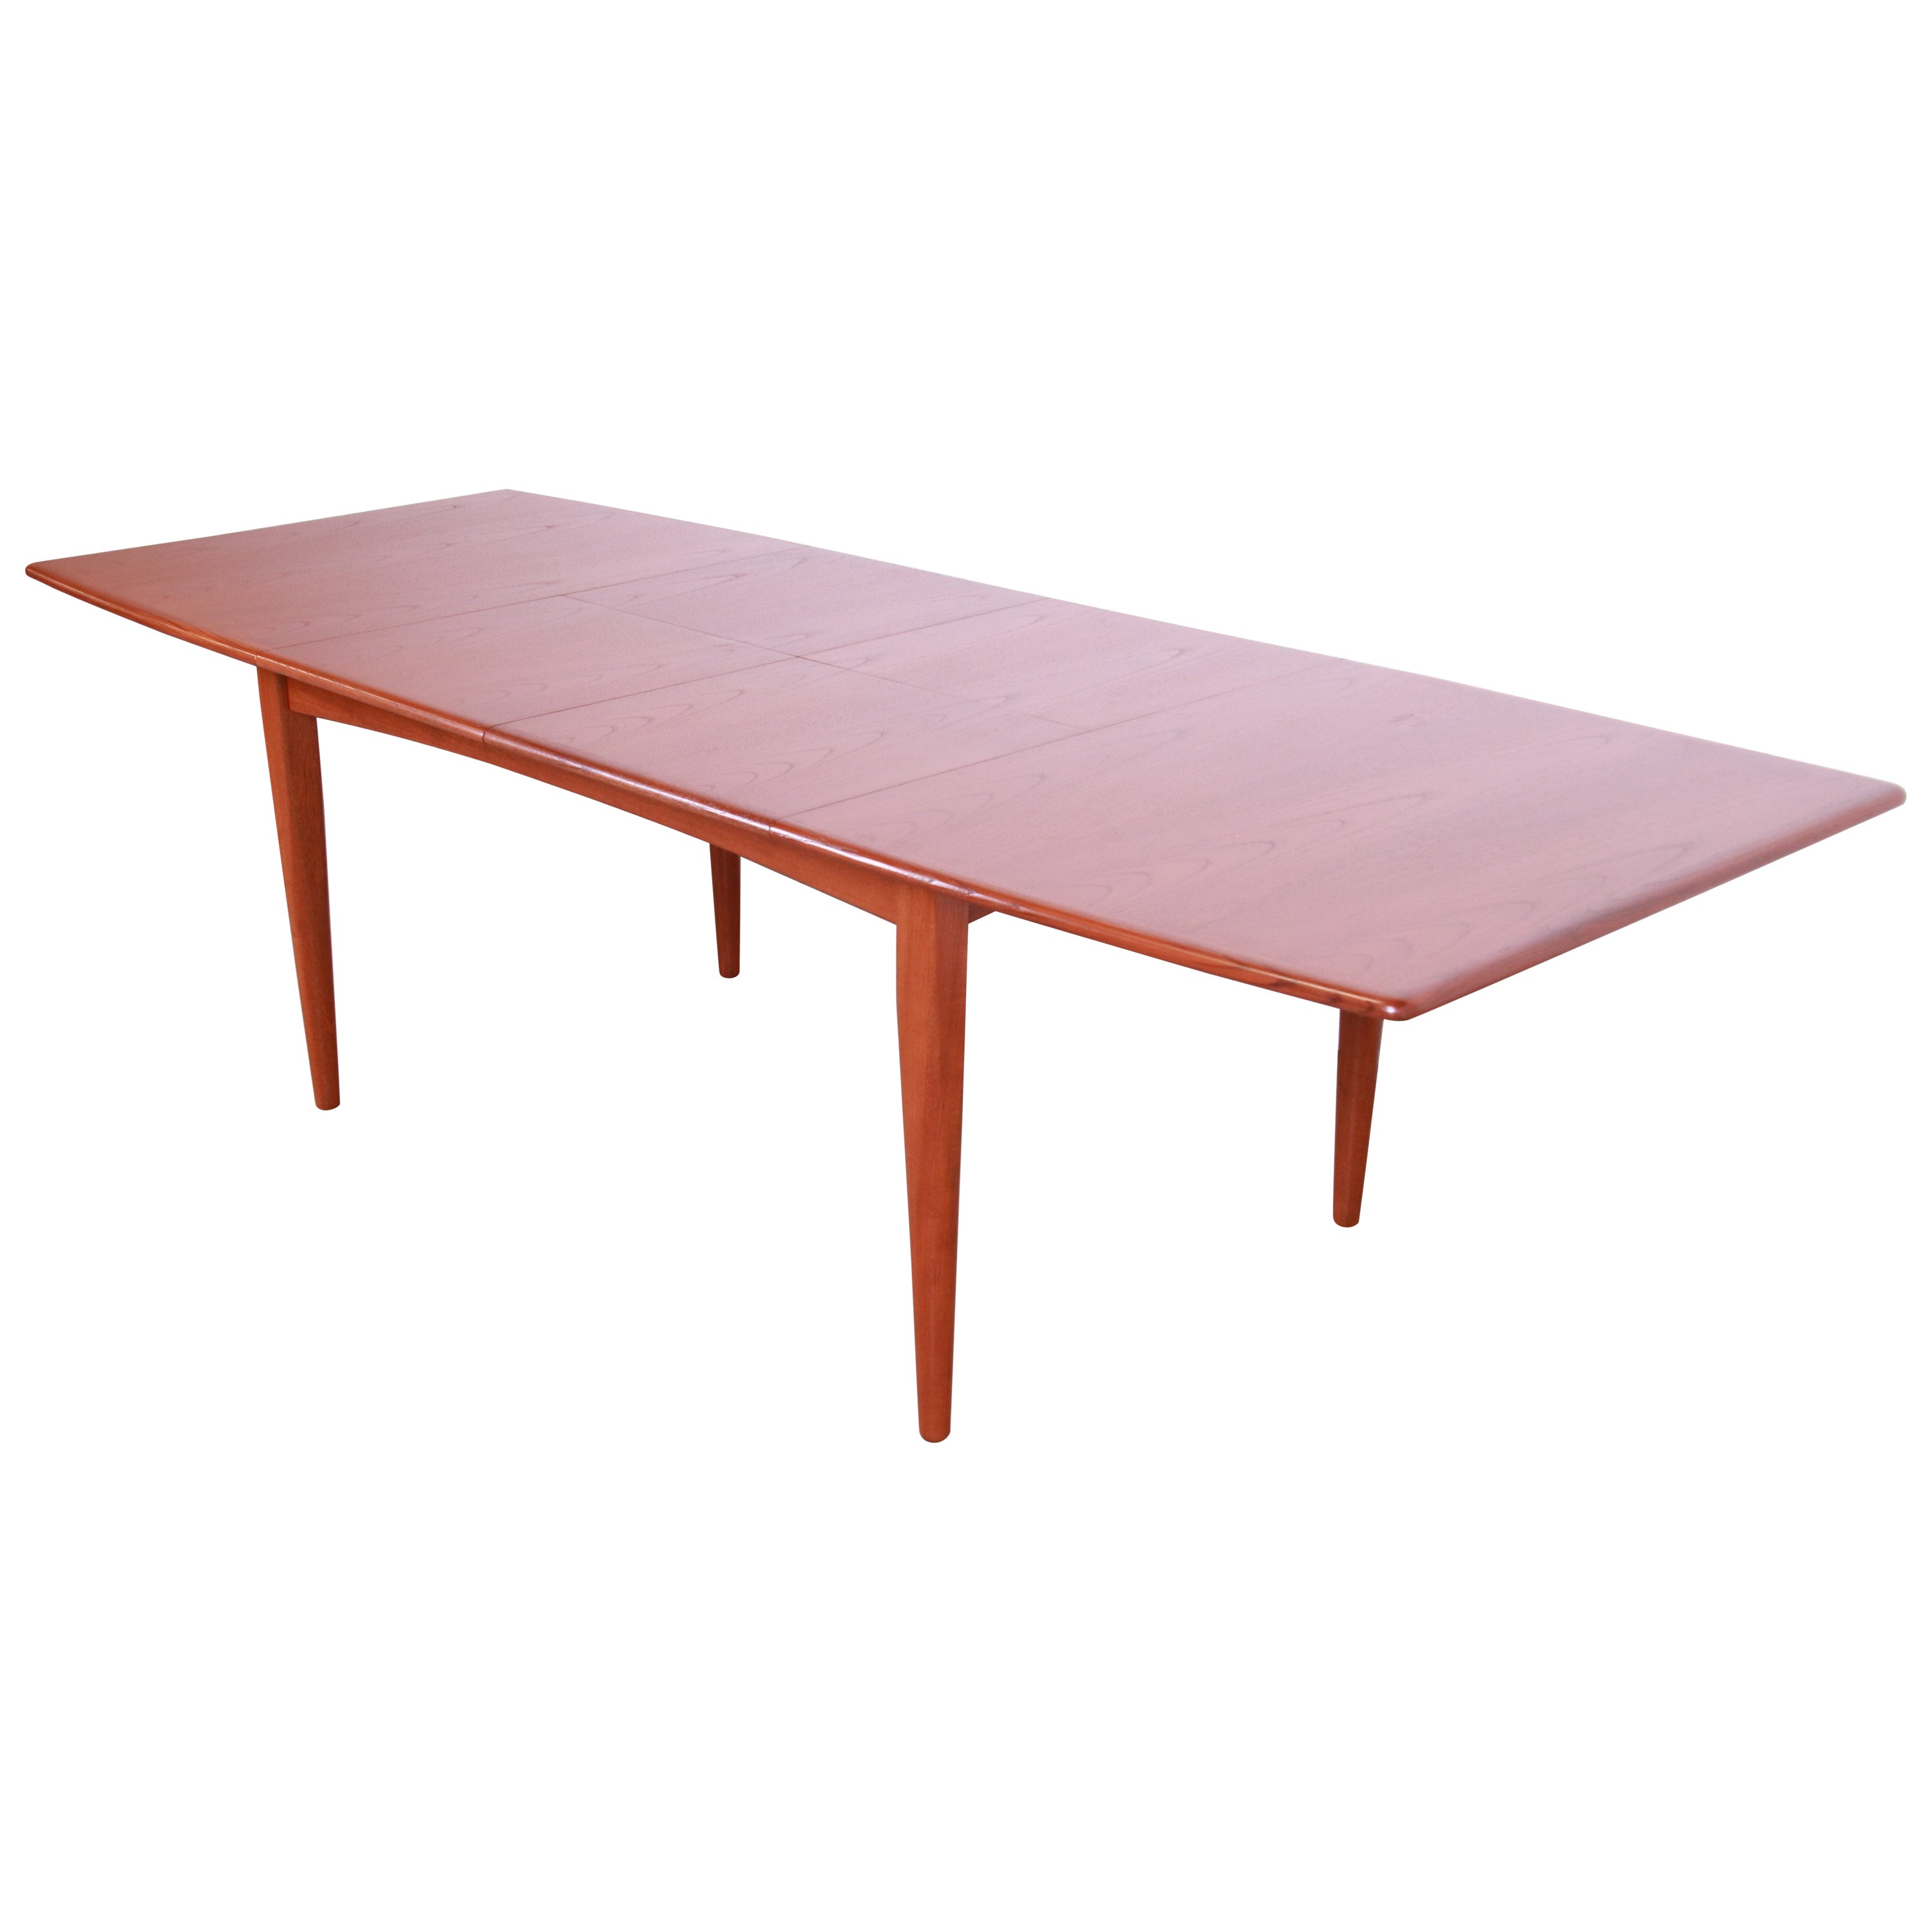 Falster Danish Modern Teak Boat-Shaped Extension Dining Table, Newly Refinished